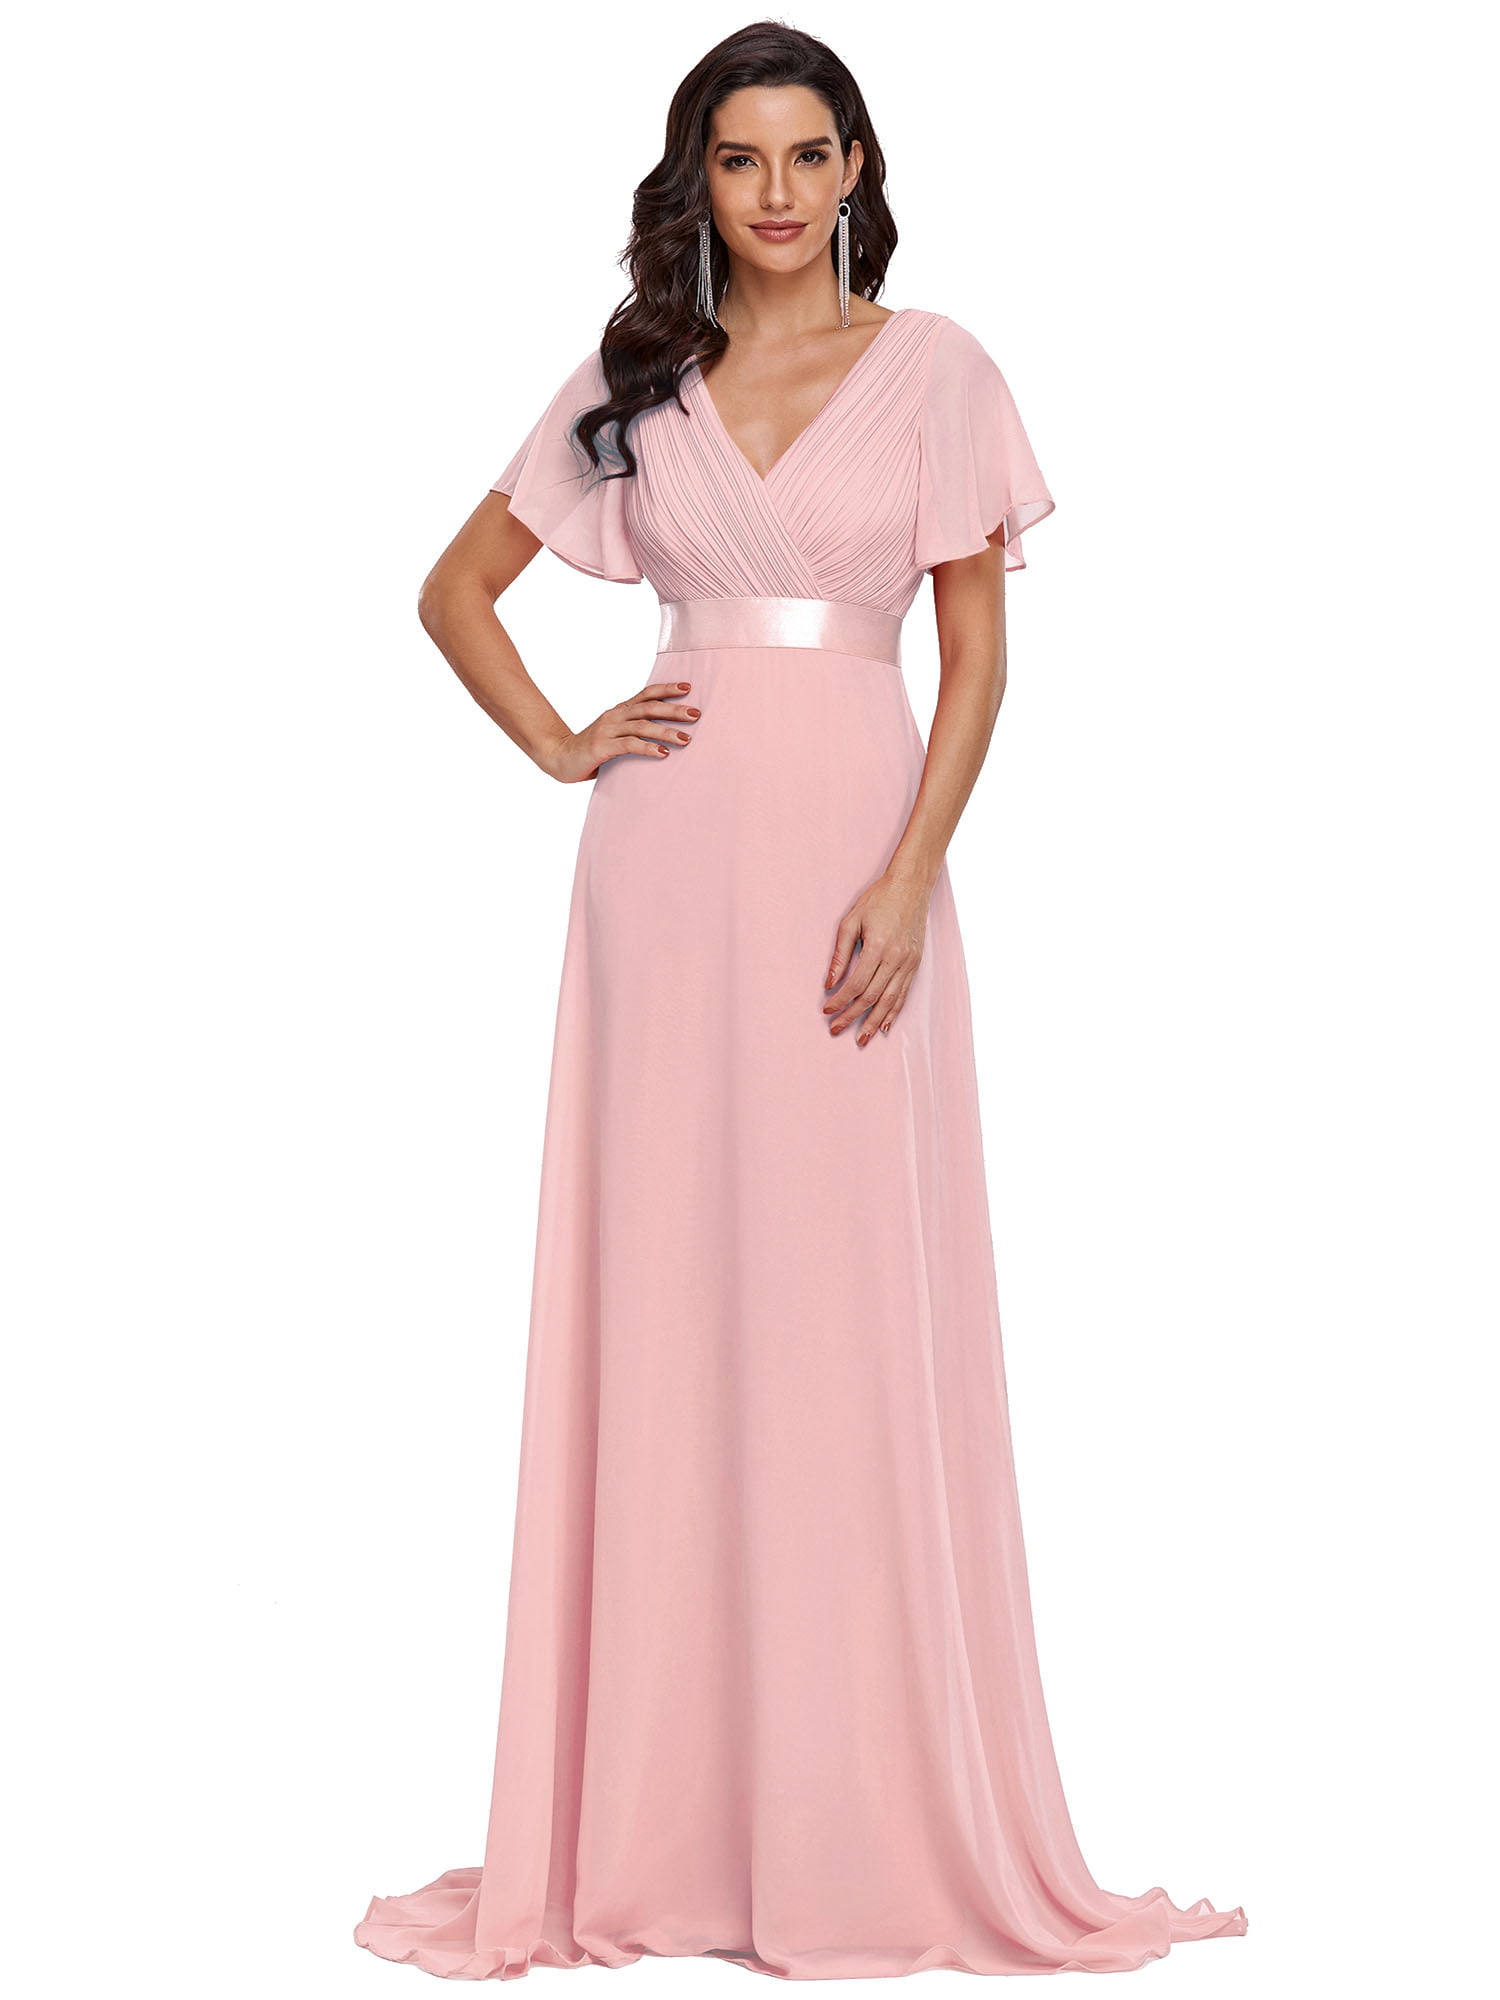 Ever-Pretty Short Sleeves V-Neck Evening Dresses Long Bridesmaid Prom Gown 09890